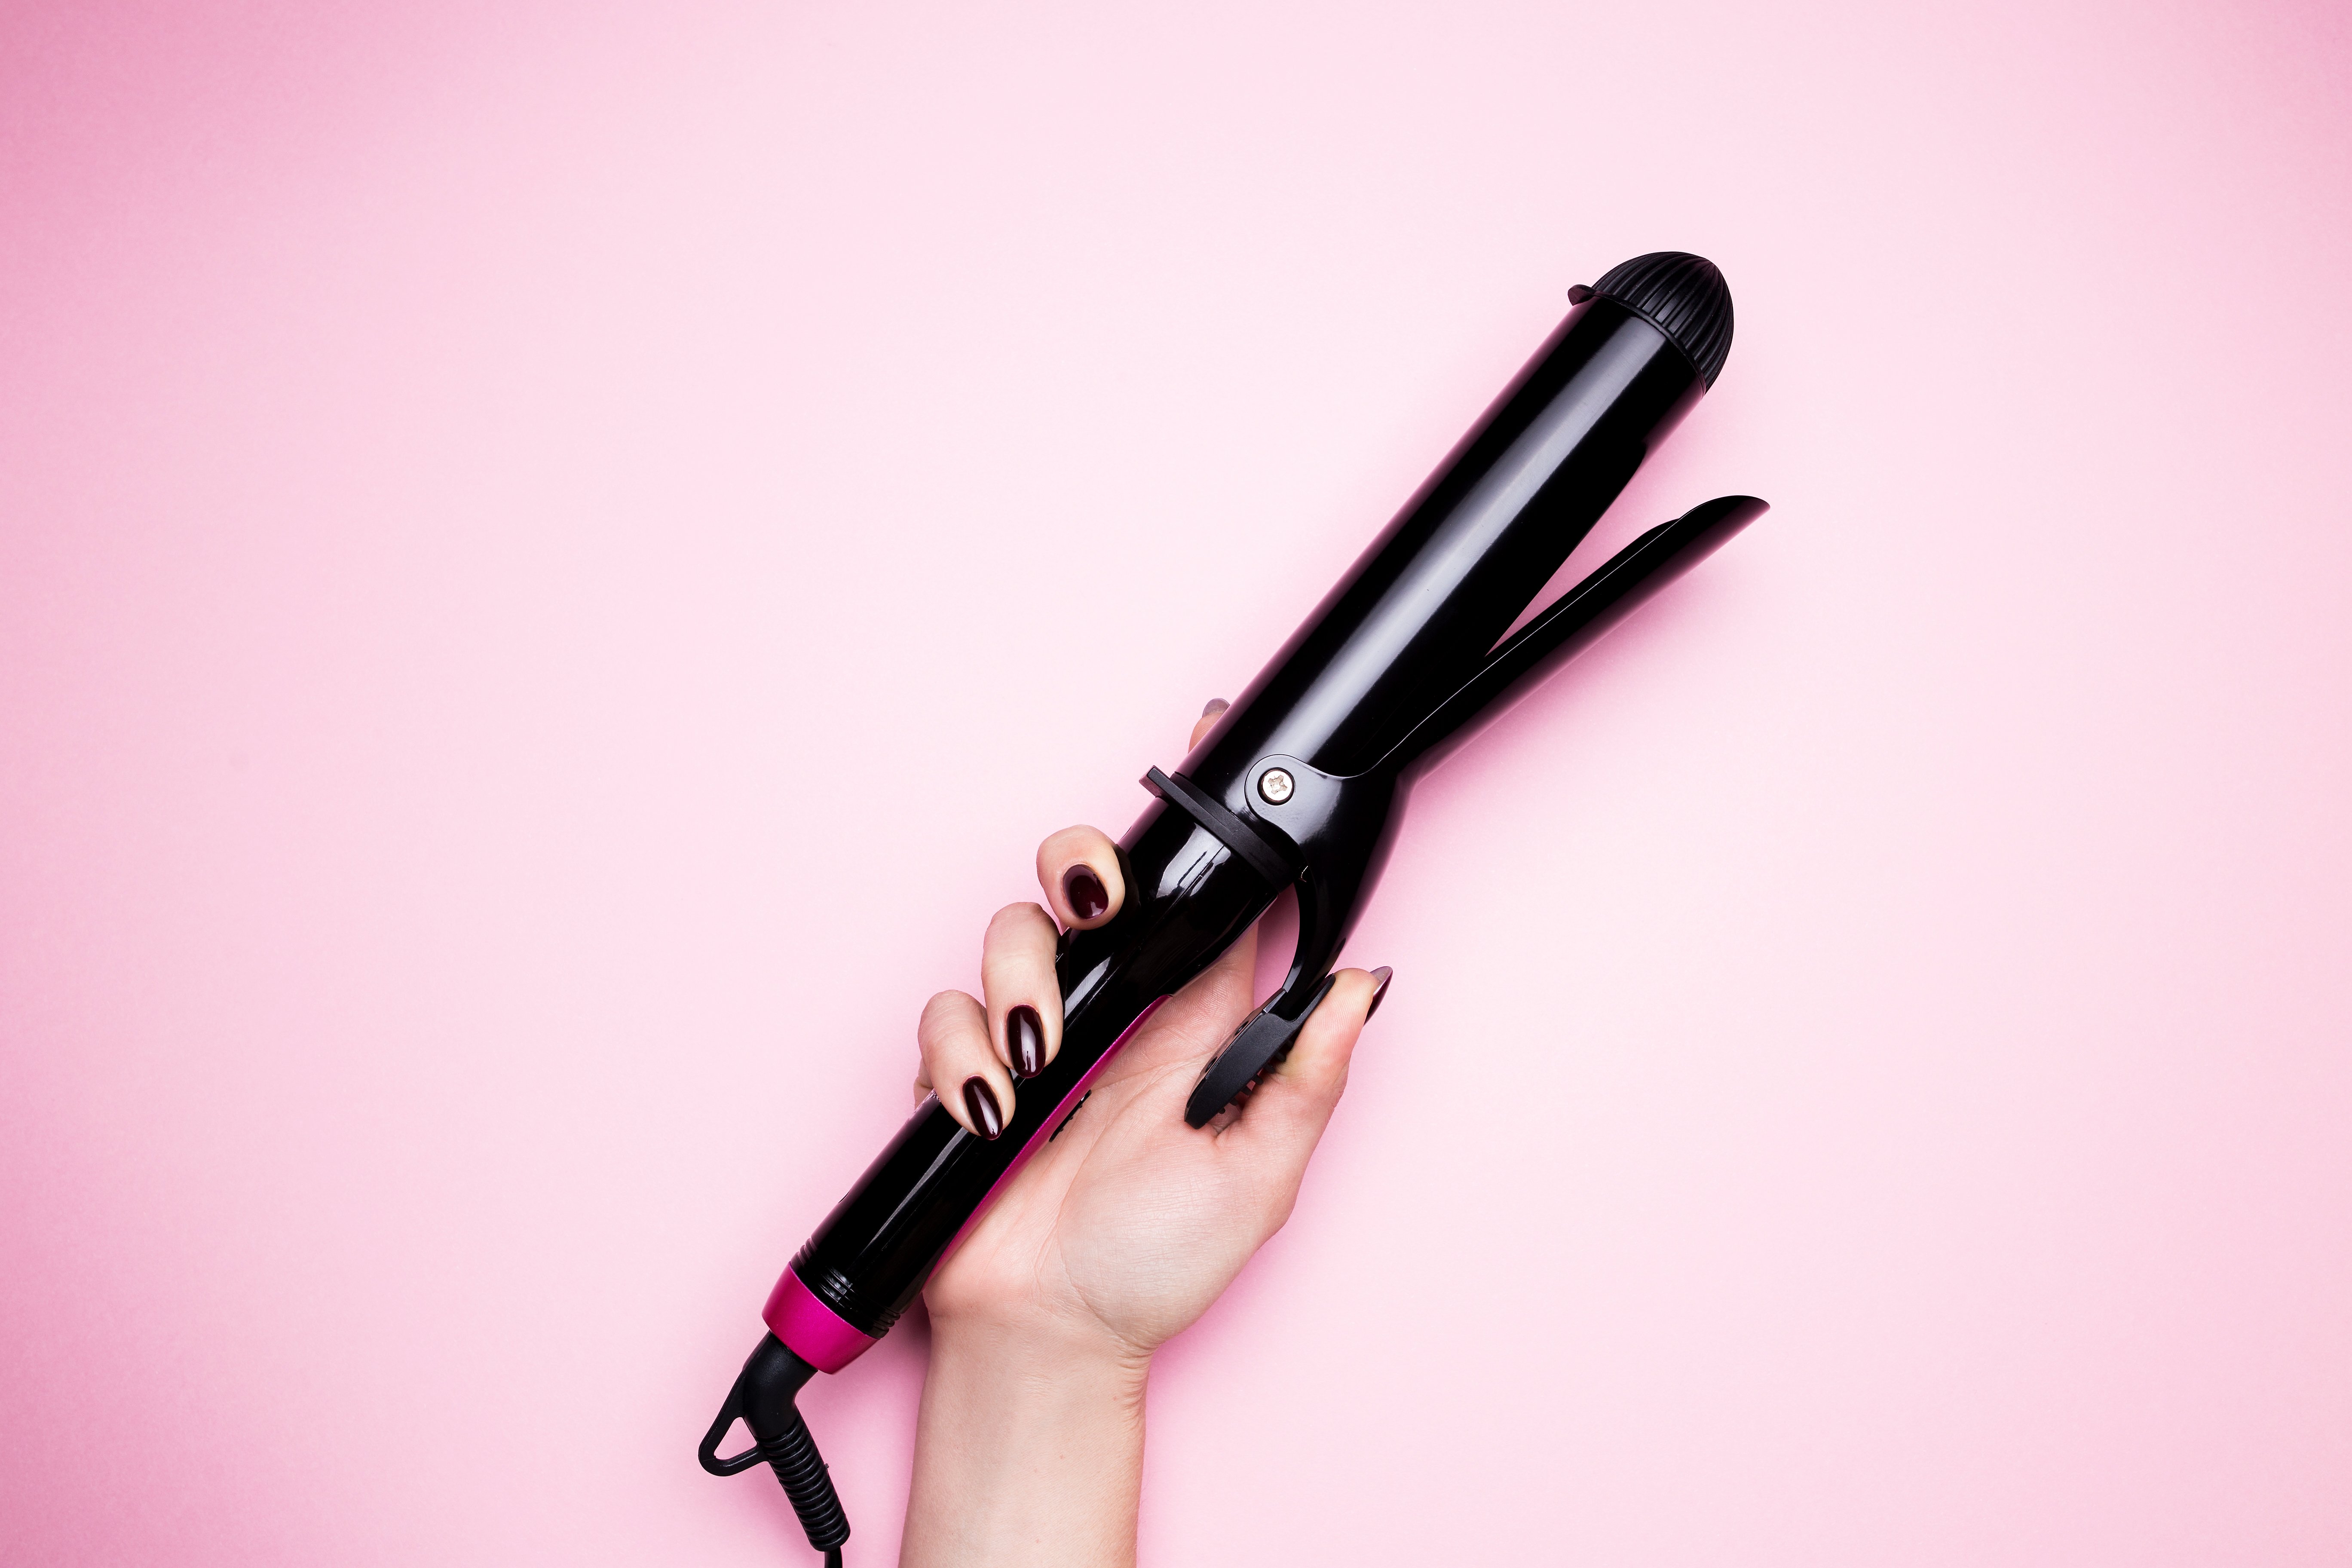 Curling Iron. | Source: Getty Images